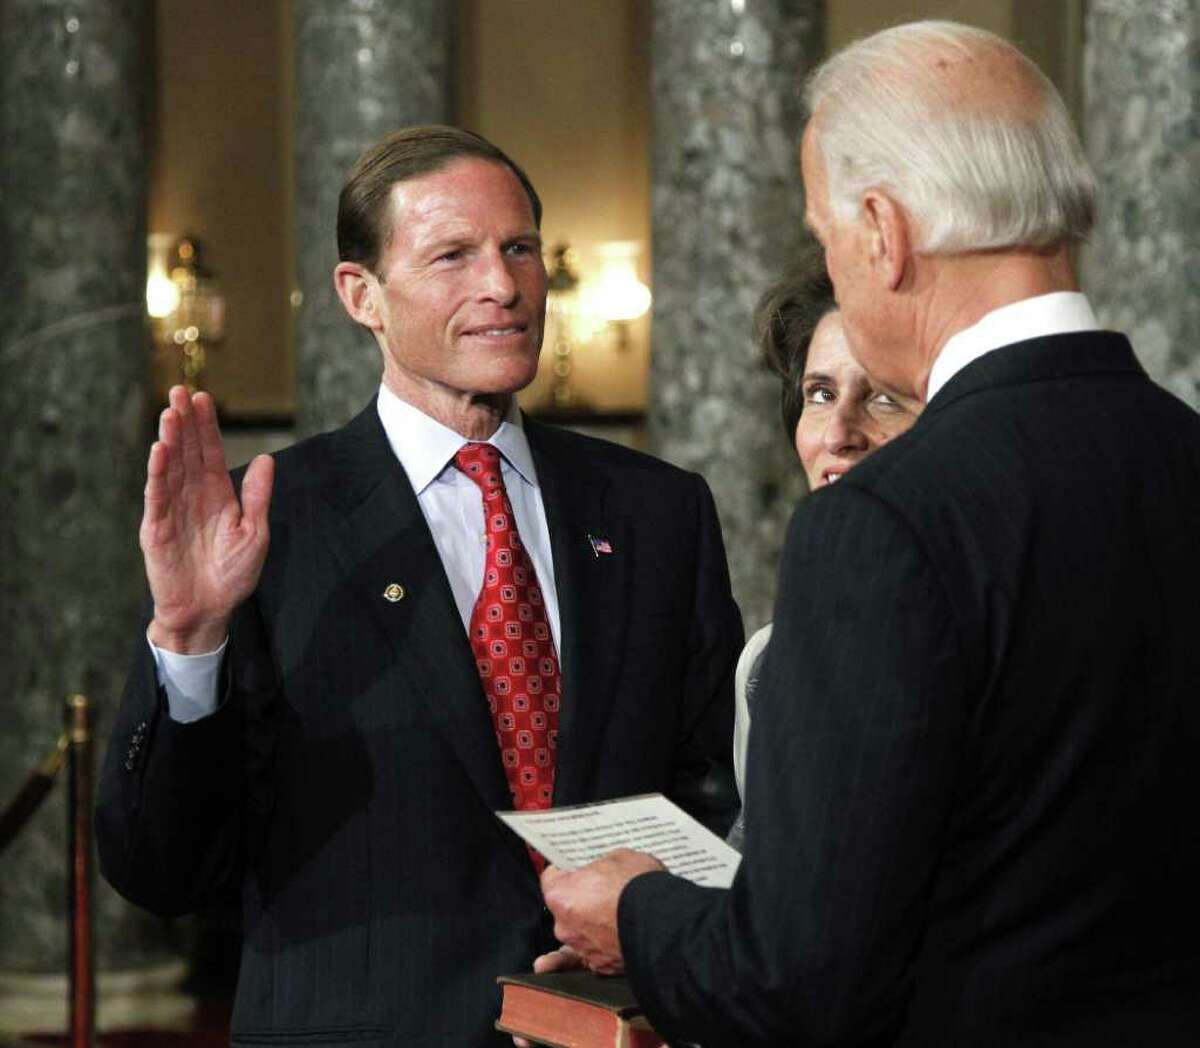 Vice President Joe Biden administers a ceremonial Senate oath during a mock swearing-in ceremony to Sen. Richard Blumenthal, D-Conn., left, accompanied by his wife Cynthia, Wednesday, Jan. 5, 2011, in the Old Senate Chamber on Capitol Hill in Washington. (AP Photo/Manuel Balce Ceneta)